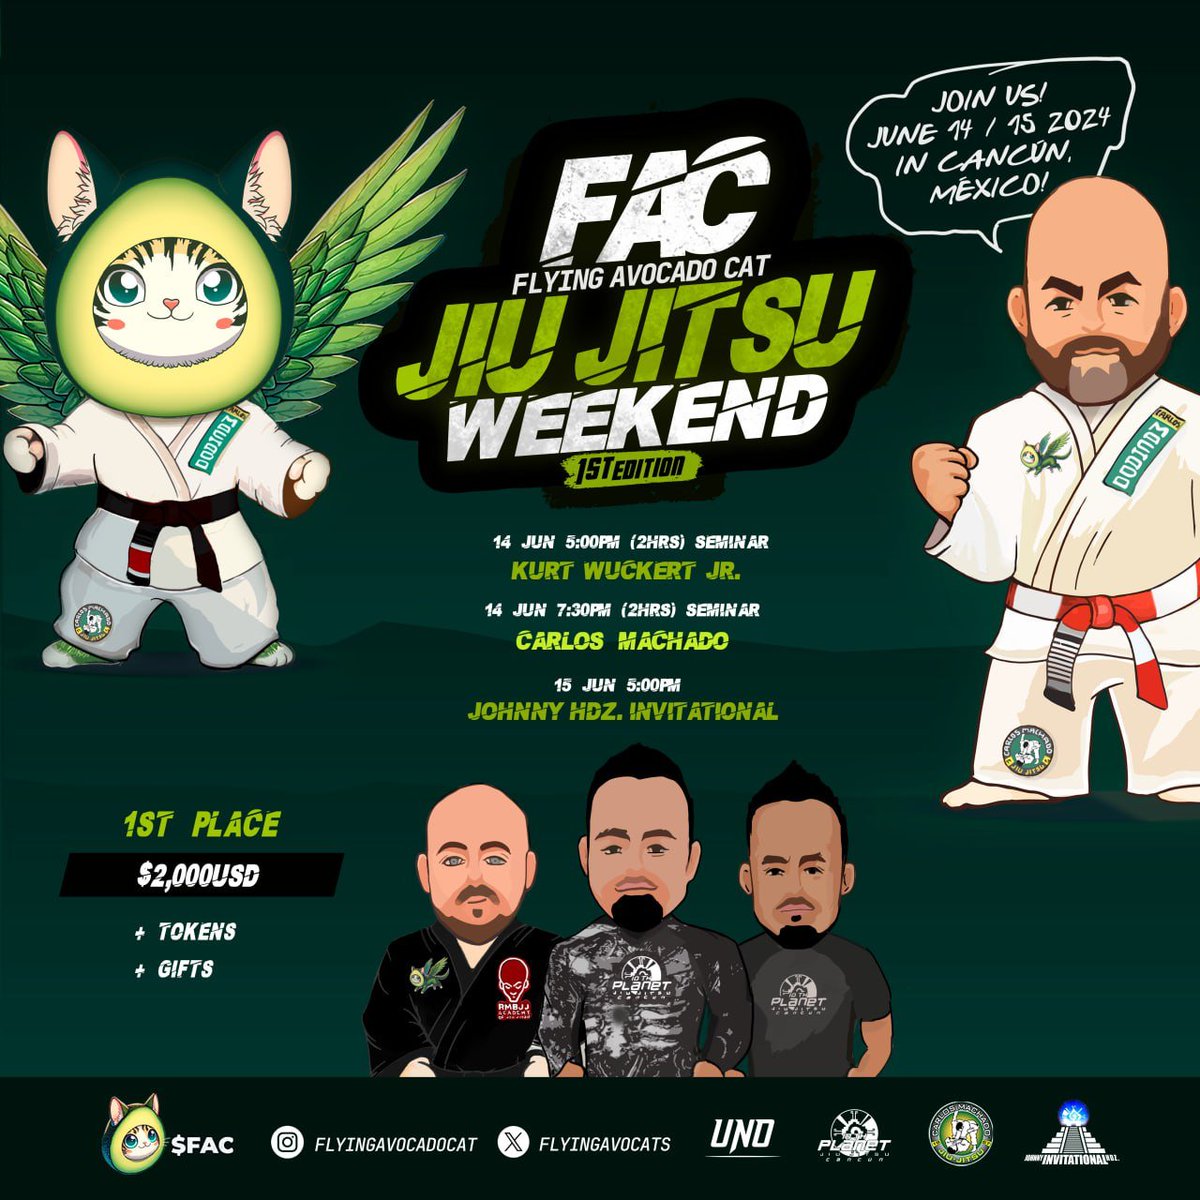 Book your weekend in Cancun for a $FAC Jiu-Jitsu Masterclass!

When? June 14-15, 2024
Are there prizes? Yes
Who are the trainers? The best in the field

Get ready for a unique experience! 🥋😺

#FlyingAvocadoCat